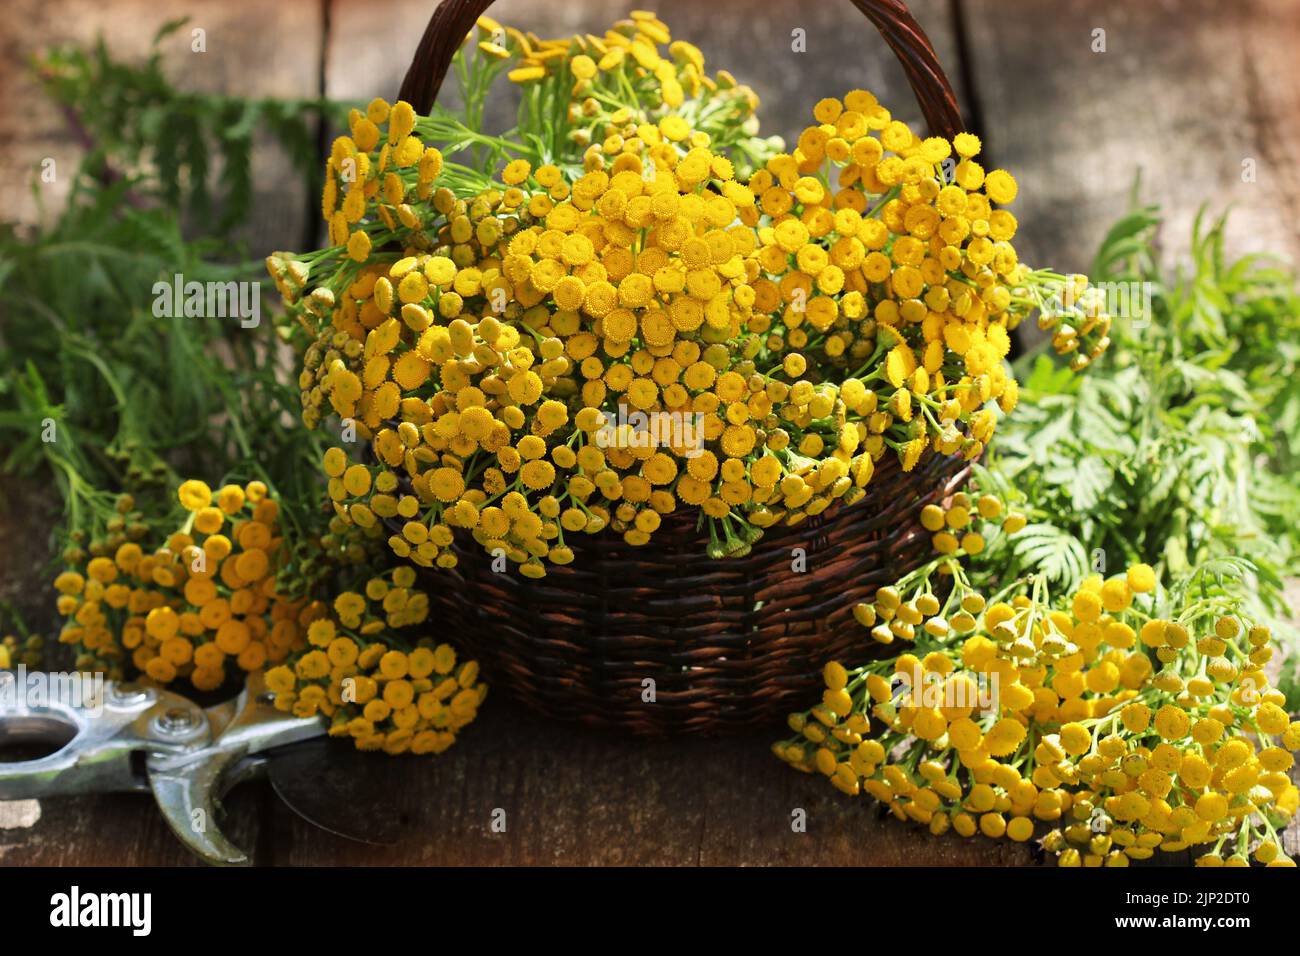 harvest, tansy, harvests, tansies Stock Photo